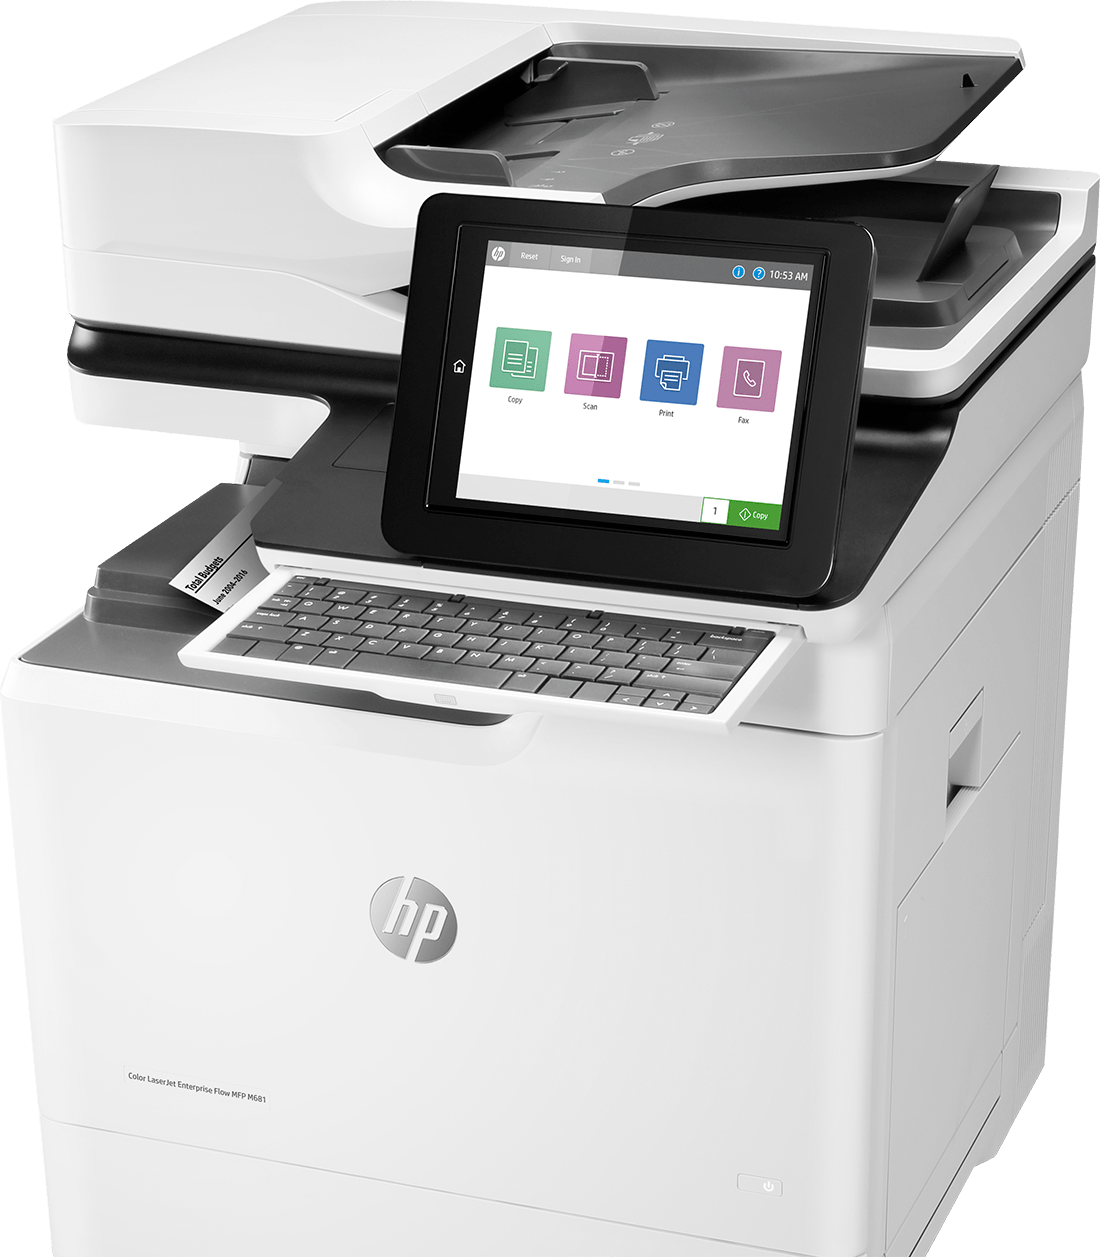 LEASE PRINTER FOR SMALL BUSINESS